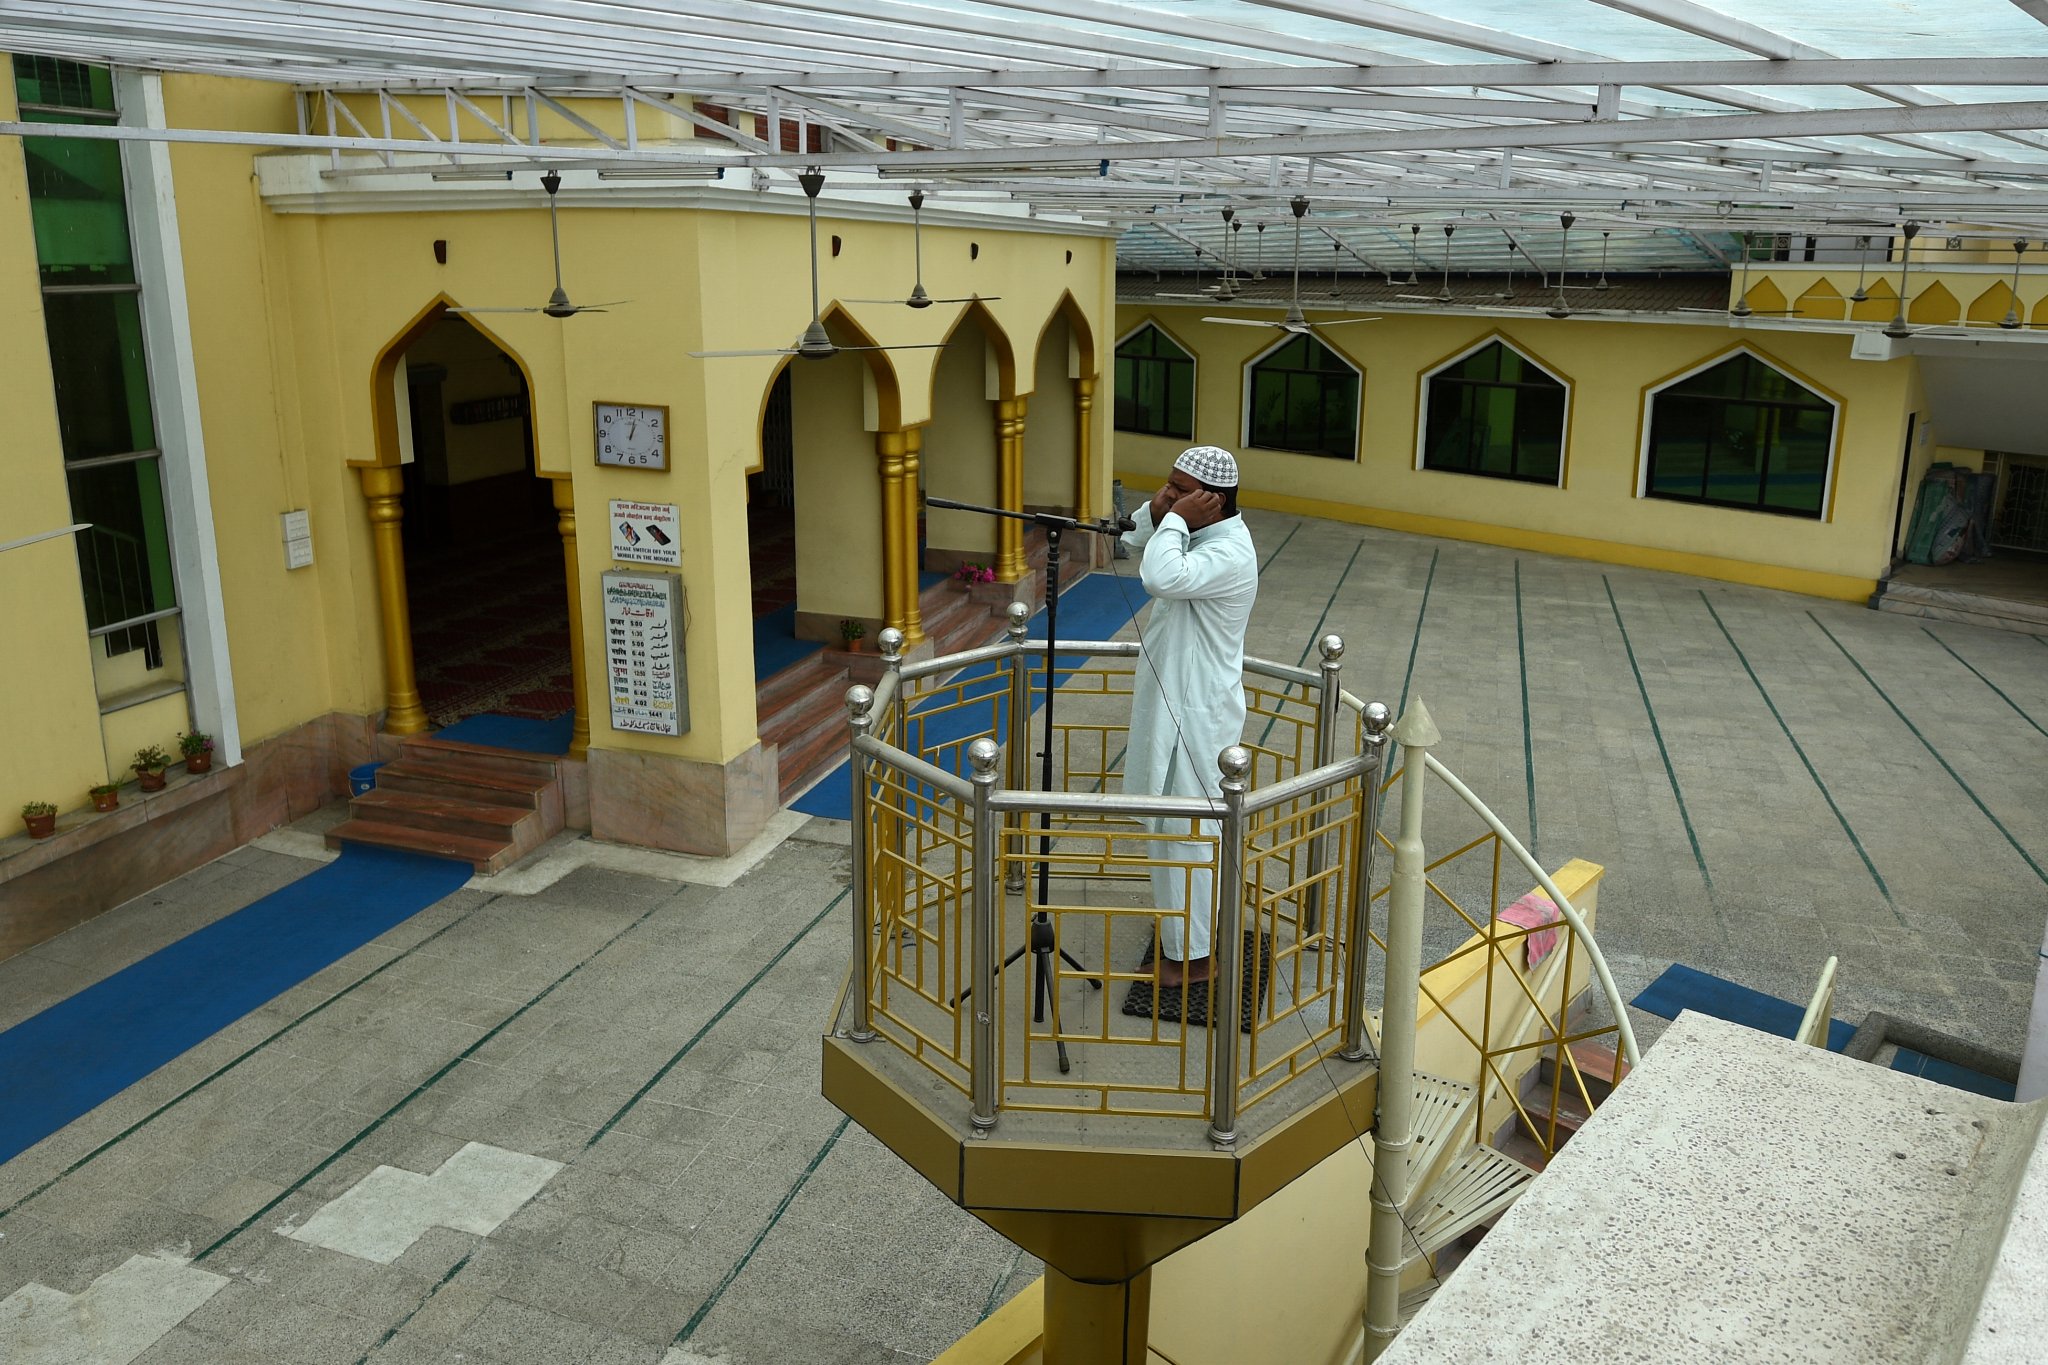 A Muezzin, person appointed to call Muslims to prayers, recites the azan (call to prayer) on the first day of the holy month of Ramadan during a government-imposed nationwide lockdown as a preventive measure against the COVID-19 coronavirus, at the Jame Masjid in Kathmandu on April 25, 2020. PRAKASH MATHEMA / AFP